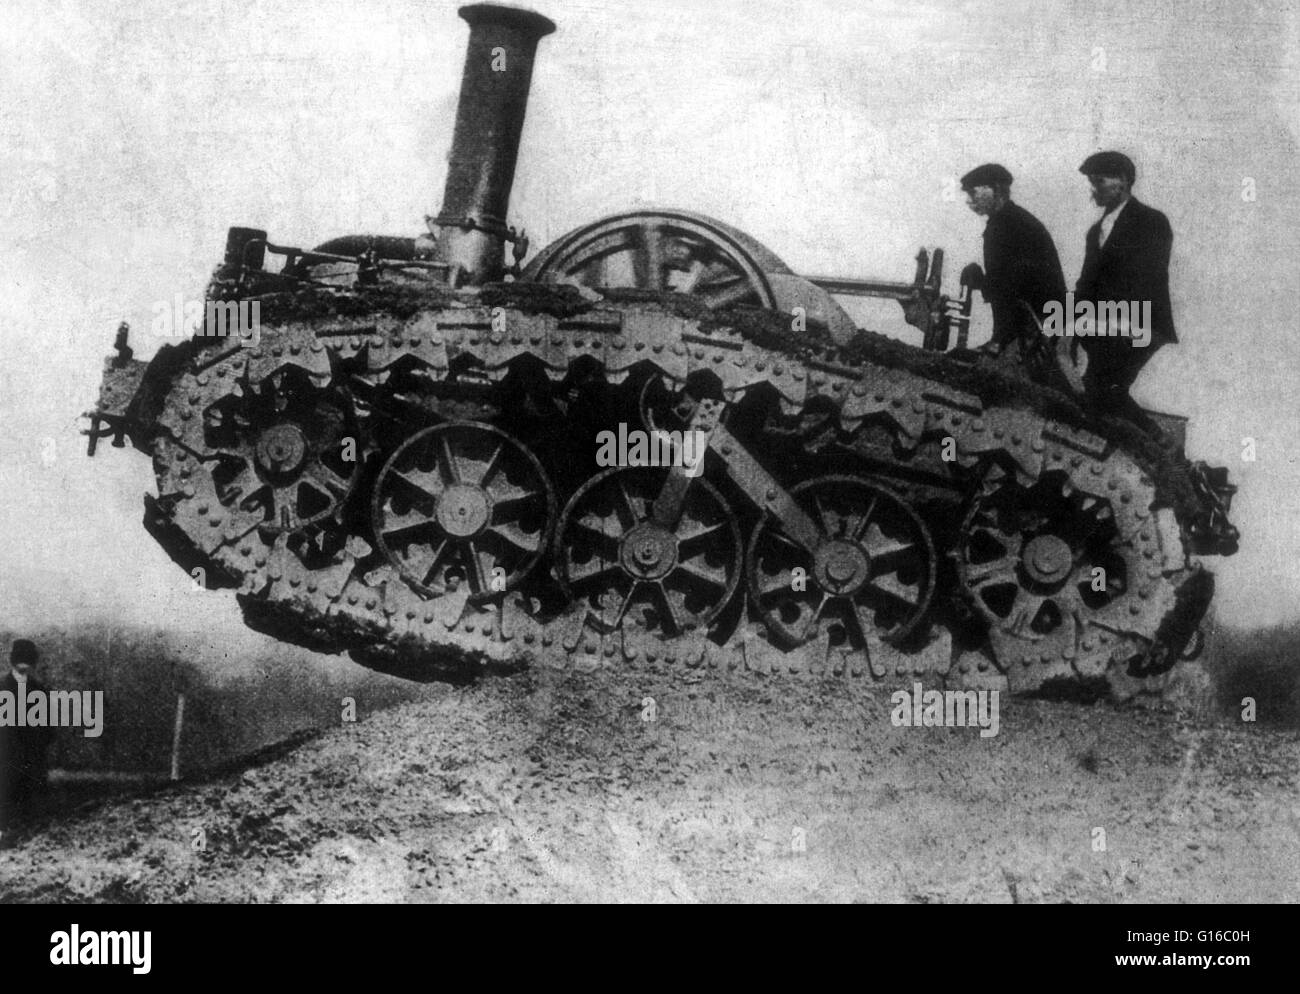 David Roberts (1859 - April 22, 1928, Grantham) was the Chief Engineer and managing director of Richard Hornsby & Sons in the early 1900s. His invention, the caterpillar track, was demonstrated to the army in 1907. In 1903, the British War Office offered Stock Photo